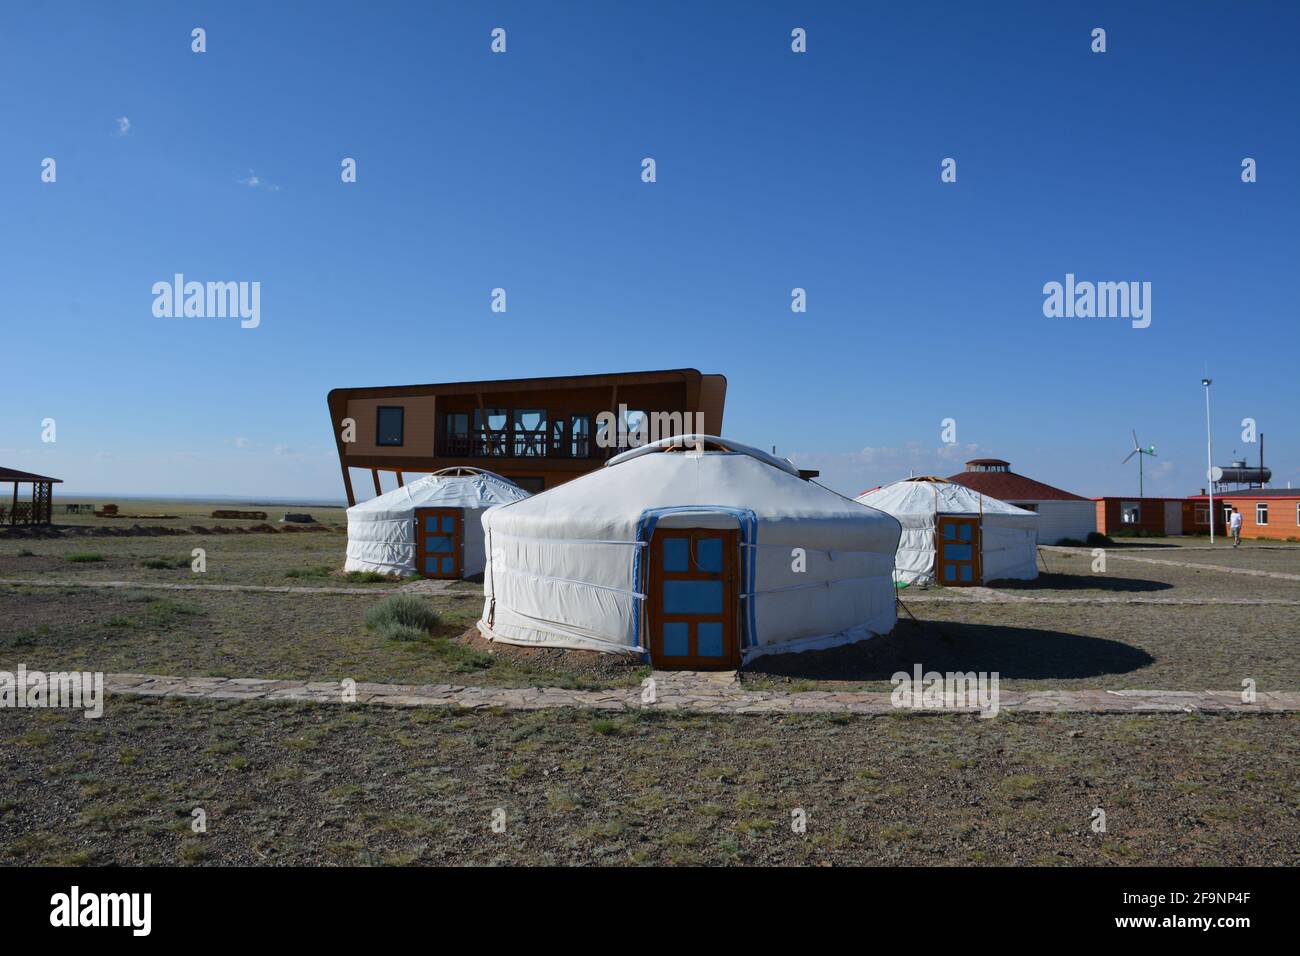 Ger camp at the Bayanzag / Flaming Cliffs area of the Gobi Desert in the Ömnögovi Province of Mongolia, where important fossil finds have been made. Stock Photo